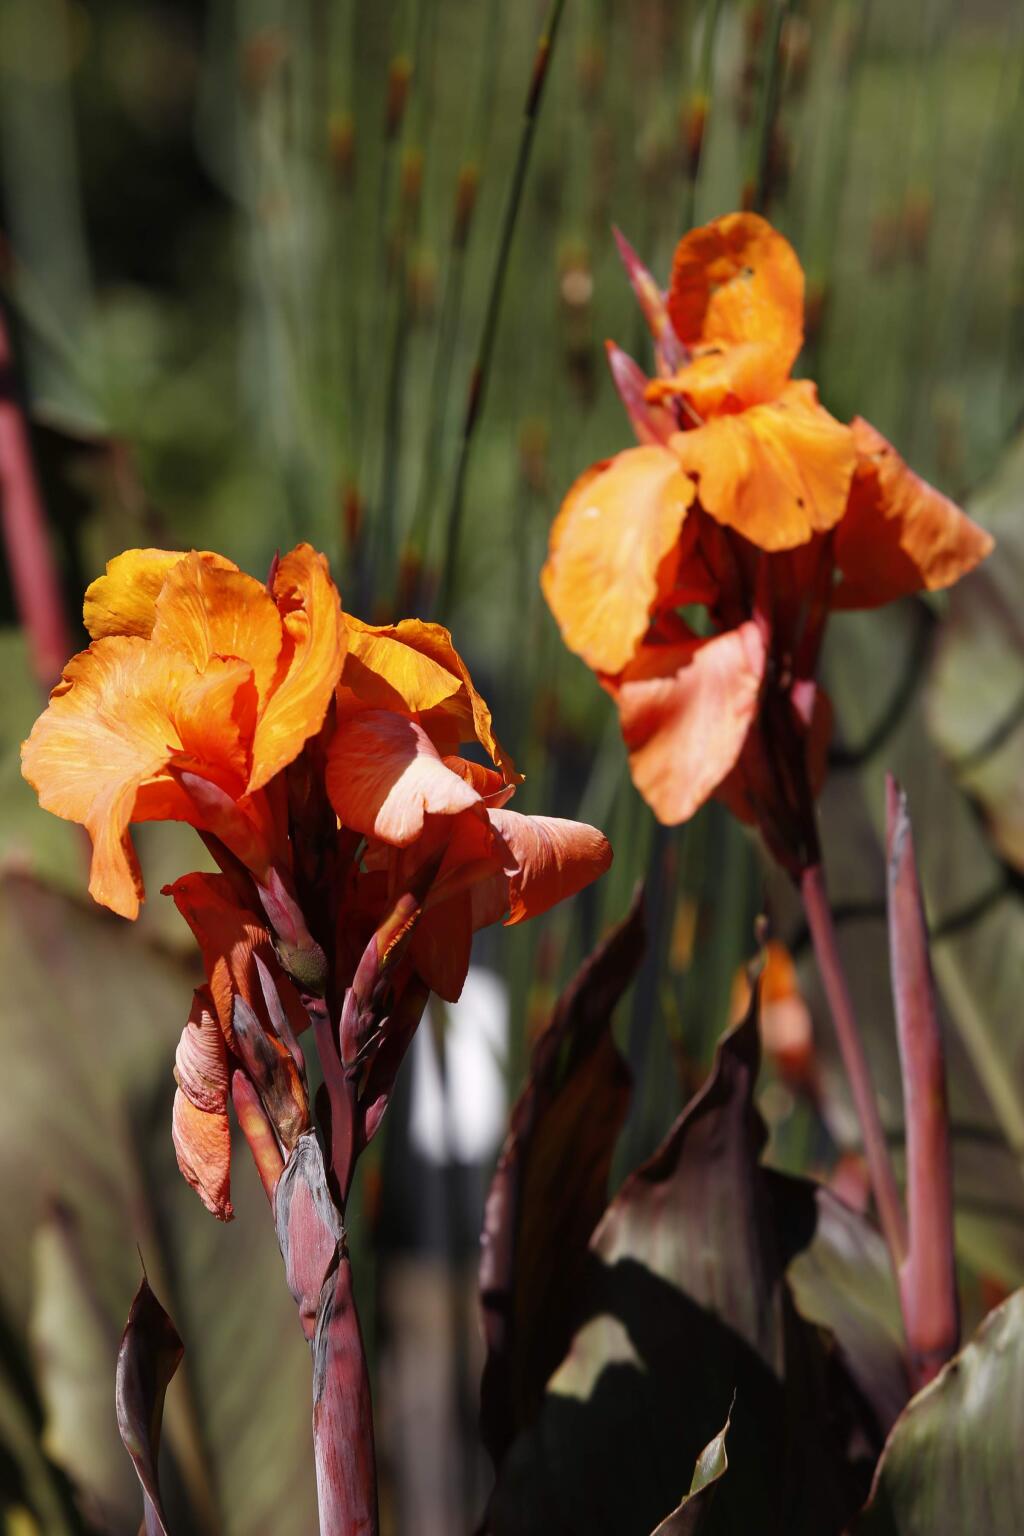 Canna lilies grow in a garden designed by landscape architect Kate Anchordoguy in Sebastopol, on Wednesday, July 1, 2015. (BETH SCHLANKER/ The Press Democrat)